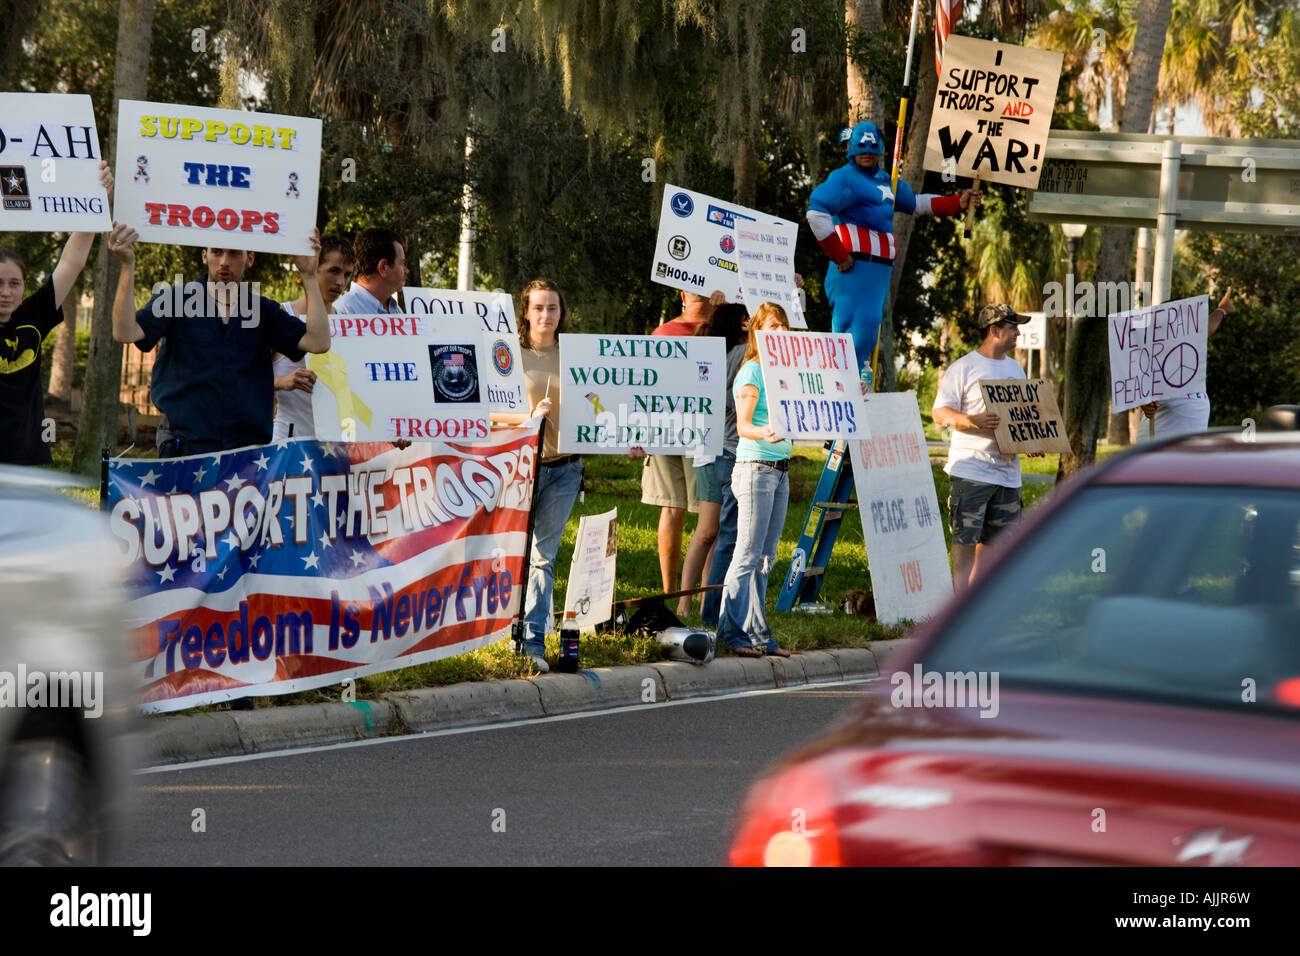 Supporters of the war in Iraq standing on an intersection in the Tampa Bay Area october 2007 Stock Photo